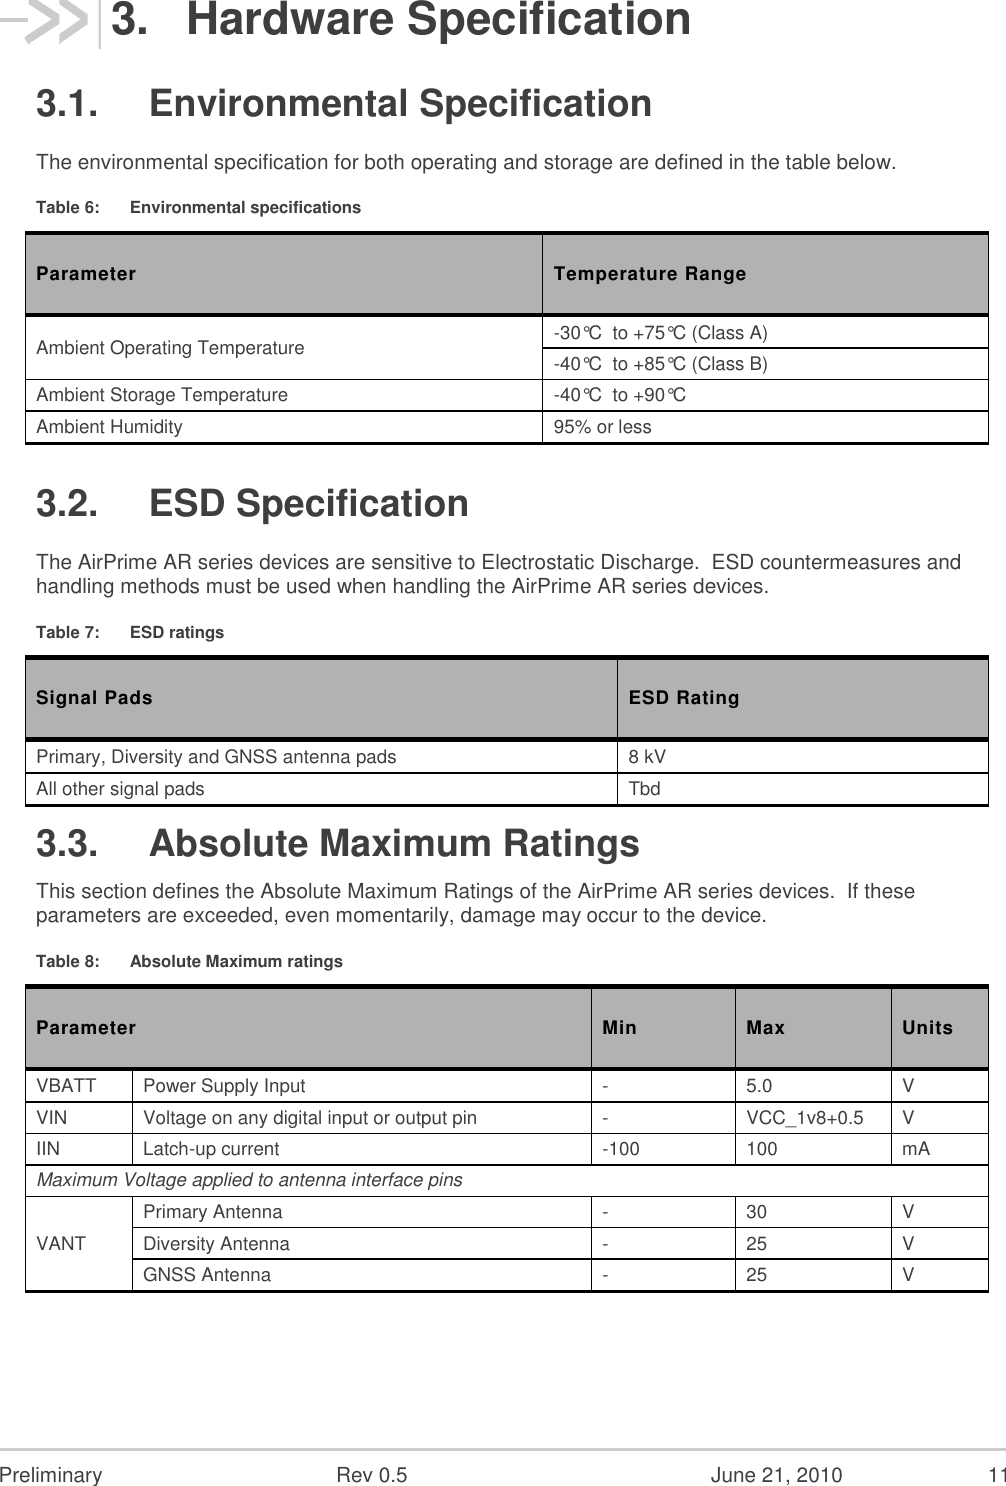  Preliminary  Rev 0.5  June 21, 2010  11 3.  Hardware Specification 3.1.  Environmental Specification The environmental specification for both operating and storage are defined in the table below. Table 6:  Environmental specifications Parameter Temperature Range Ambient Operating Temperature -30°C  to +75°C (Class A) -40°C  to +85°C (Class B) Ambient Storage Temperature -40°C  to +90°C Ambient Humidity 95% or less 3.2.  ESD Specification The AirPrime AR series devices are sensitive to Electrostatic Discharge.  ESD countermeasures and handling methods must be used when handling the AirPrime AR series devices. Table 7:  ESD ratings Signal Pads ESD Rating Primary, Diversity and GNSS antenna pads 8 kV All other signal pads Tbd 3.3.  Absolute Maximum Ratings This section defines the Absolute Maximum Ratings of the AirPrime AR series devices.  If these parameters are exceeded, even momentarily, damage may occur to the device. Table 8:  Absolute Maximum ratings Parameter Min Max Units VBATT Power Supply Input - 5.0 V VIN Voltage on any digital input or output pin - VCC_1v8+0.5 V IIN Latch-up current -100 100 mA Maximum Voltage applied to antenna interface pins VANT Primary Antenna - 30 V Diversity Antenna - 25 V GNSS Antenna - 25 V 